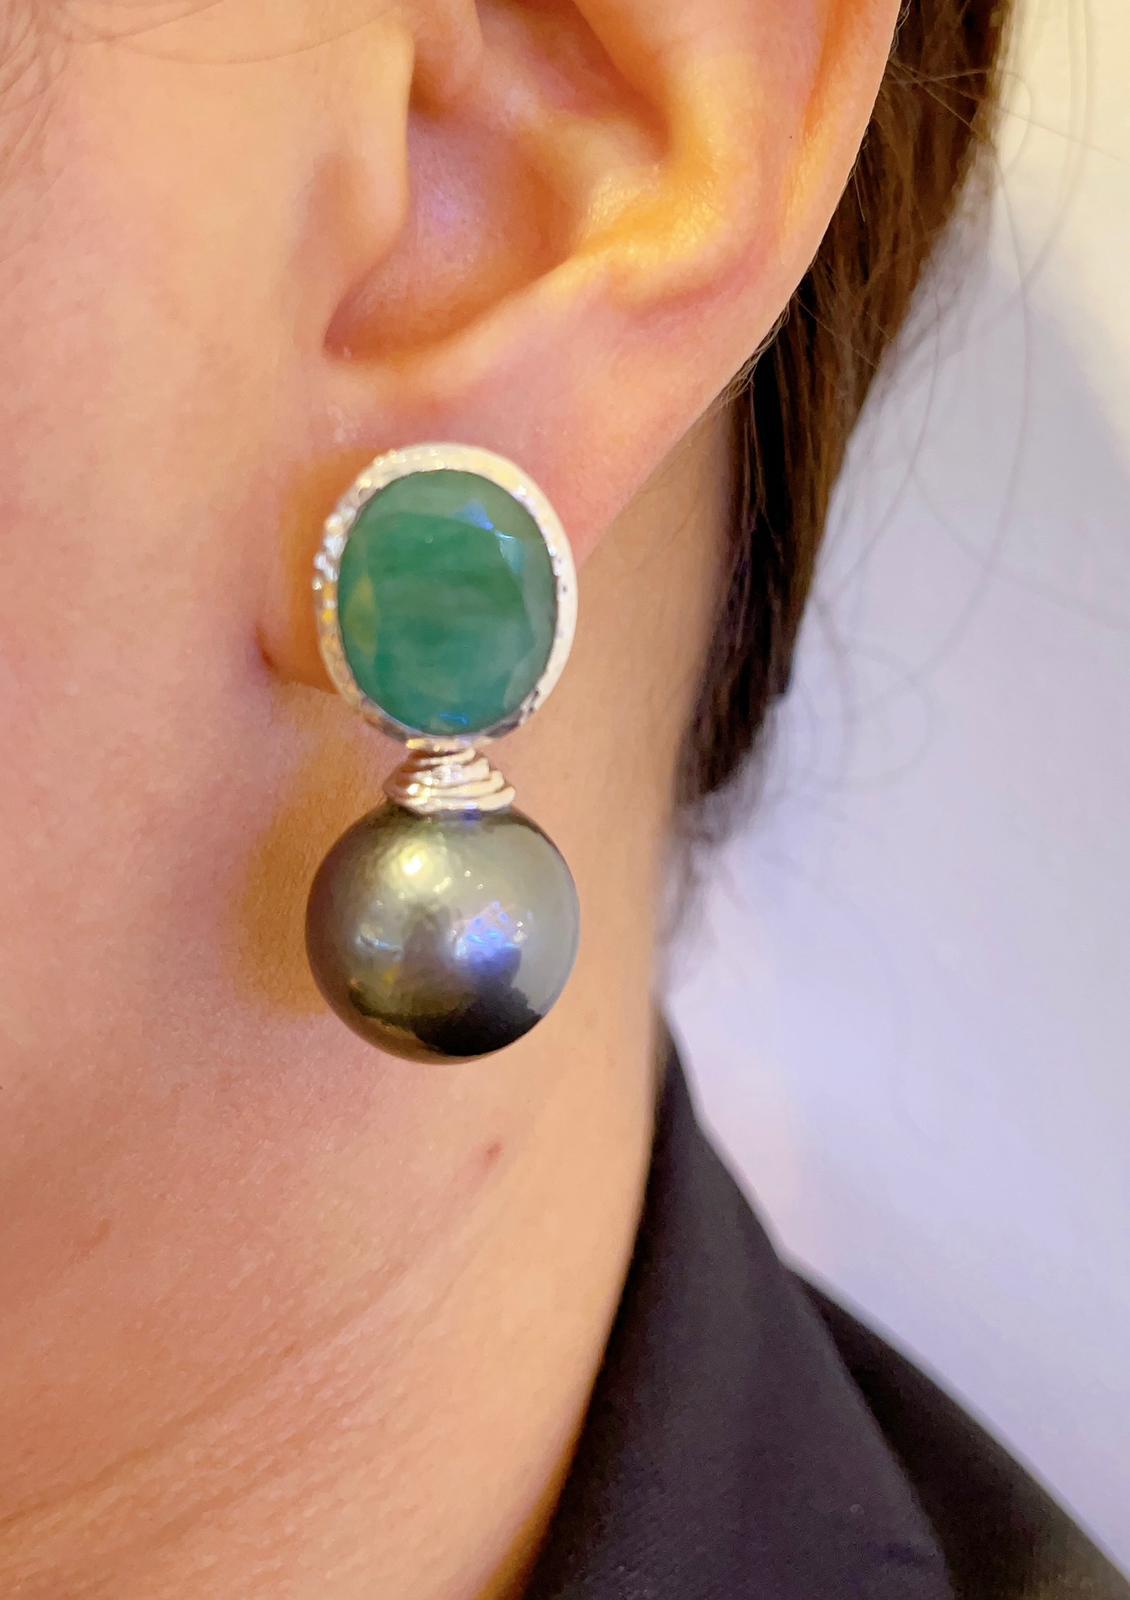 Bochic Tahiti South Sea Pearl and Emerald Earrings 
South sea Tahiti cultured pearls, grey color and Pink tone, grade AA
Natural African Zambian, Green Emeralds - 18 Carat 
Facet cut 
Oval shape 
18K white gold and silver 
Drop earrings
Comes with a